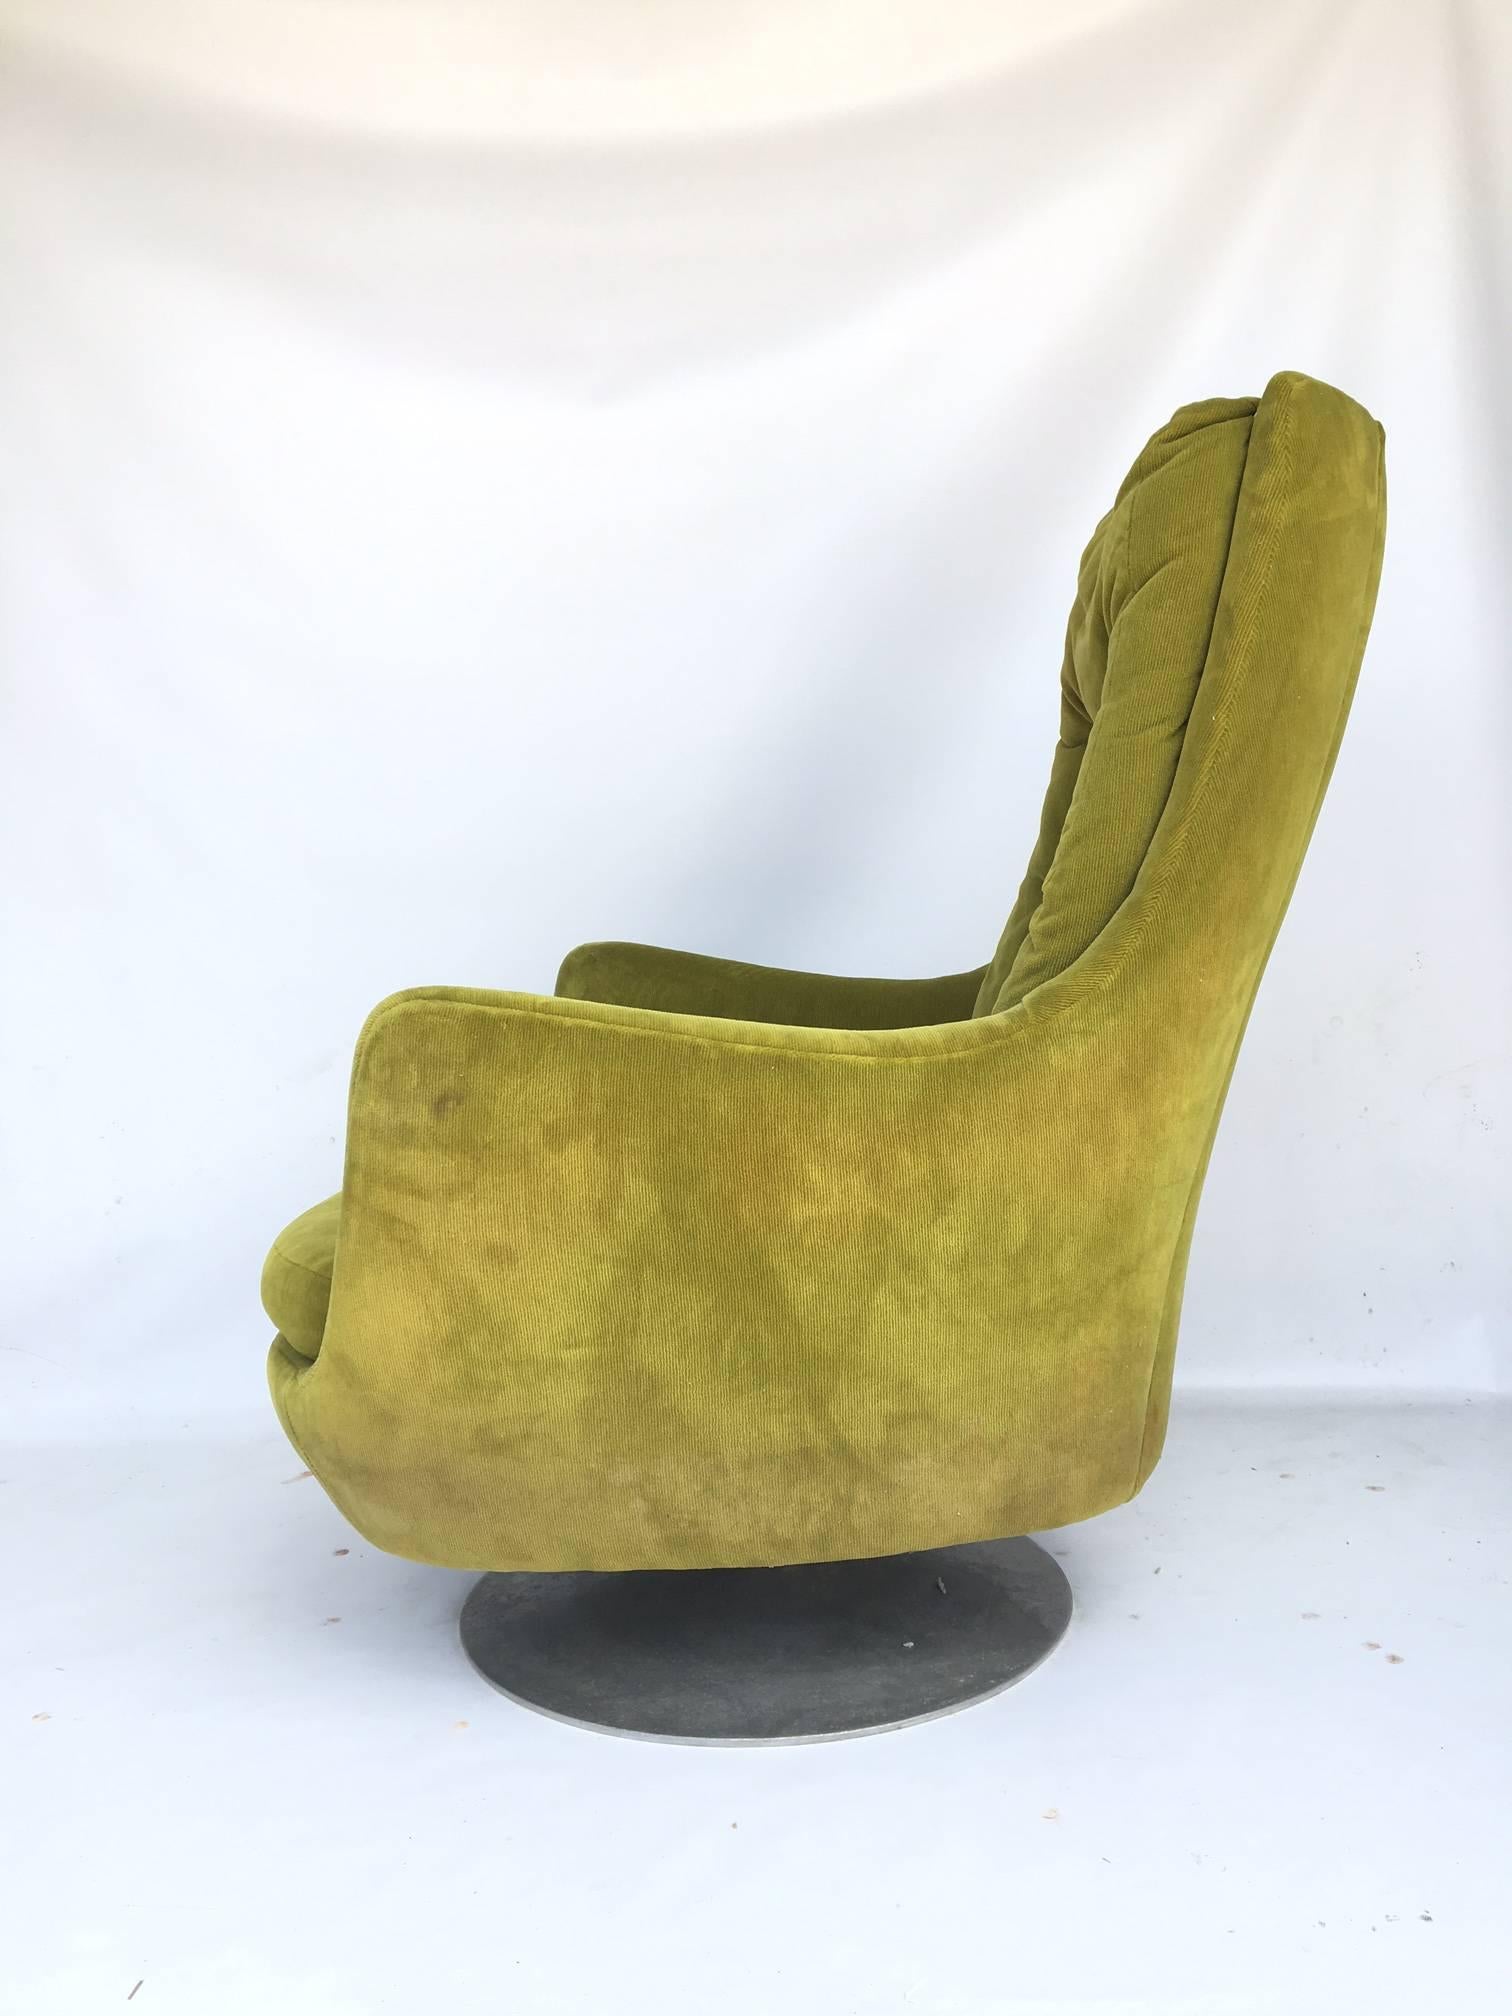 Stunning midcentury upholstered lounge chair by Milo Baughman. Sits on a swivel base that rotates 360 degrees on chrome base. Plush green fabric is in beautiful condition for it's age. Good vintage condition with minor wear consistent with age. 